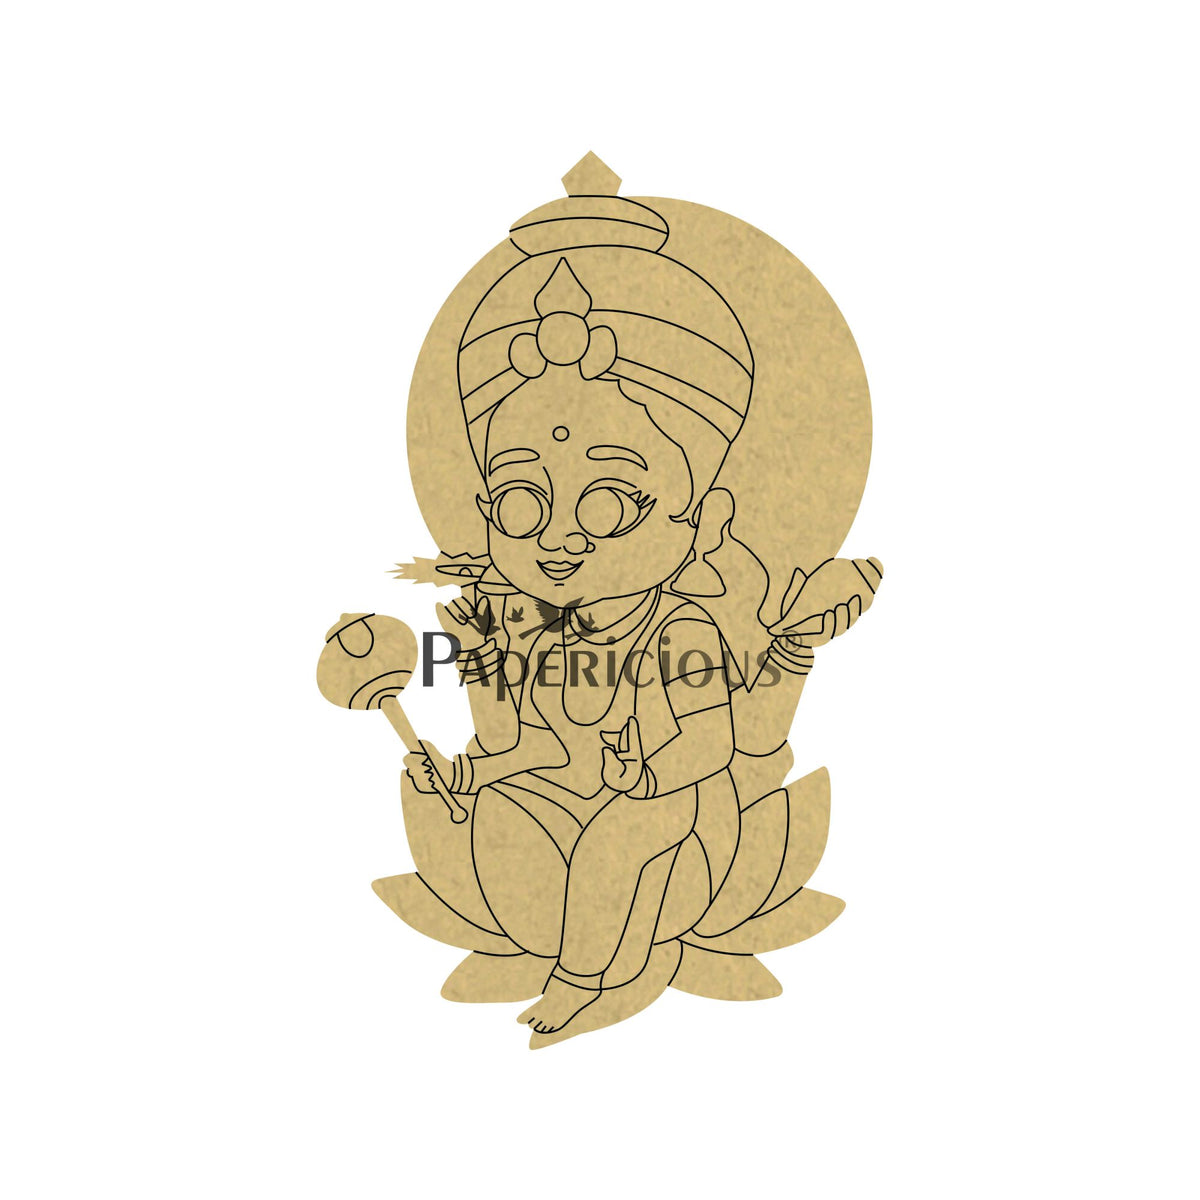 PAPERICIOUS 4mm thick Pre Marked MDF Base Goddess Laxmi